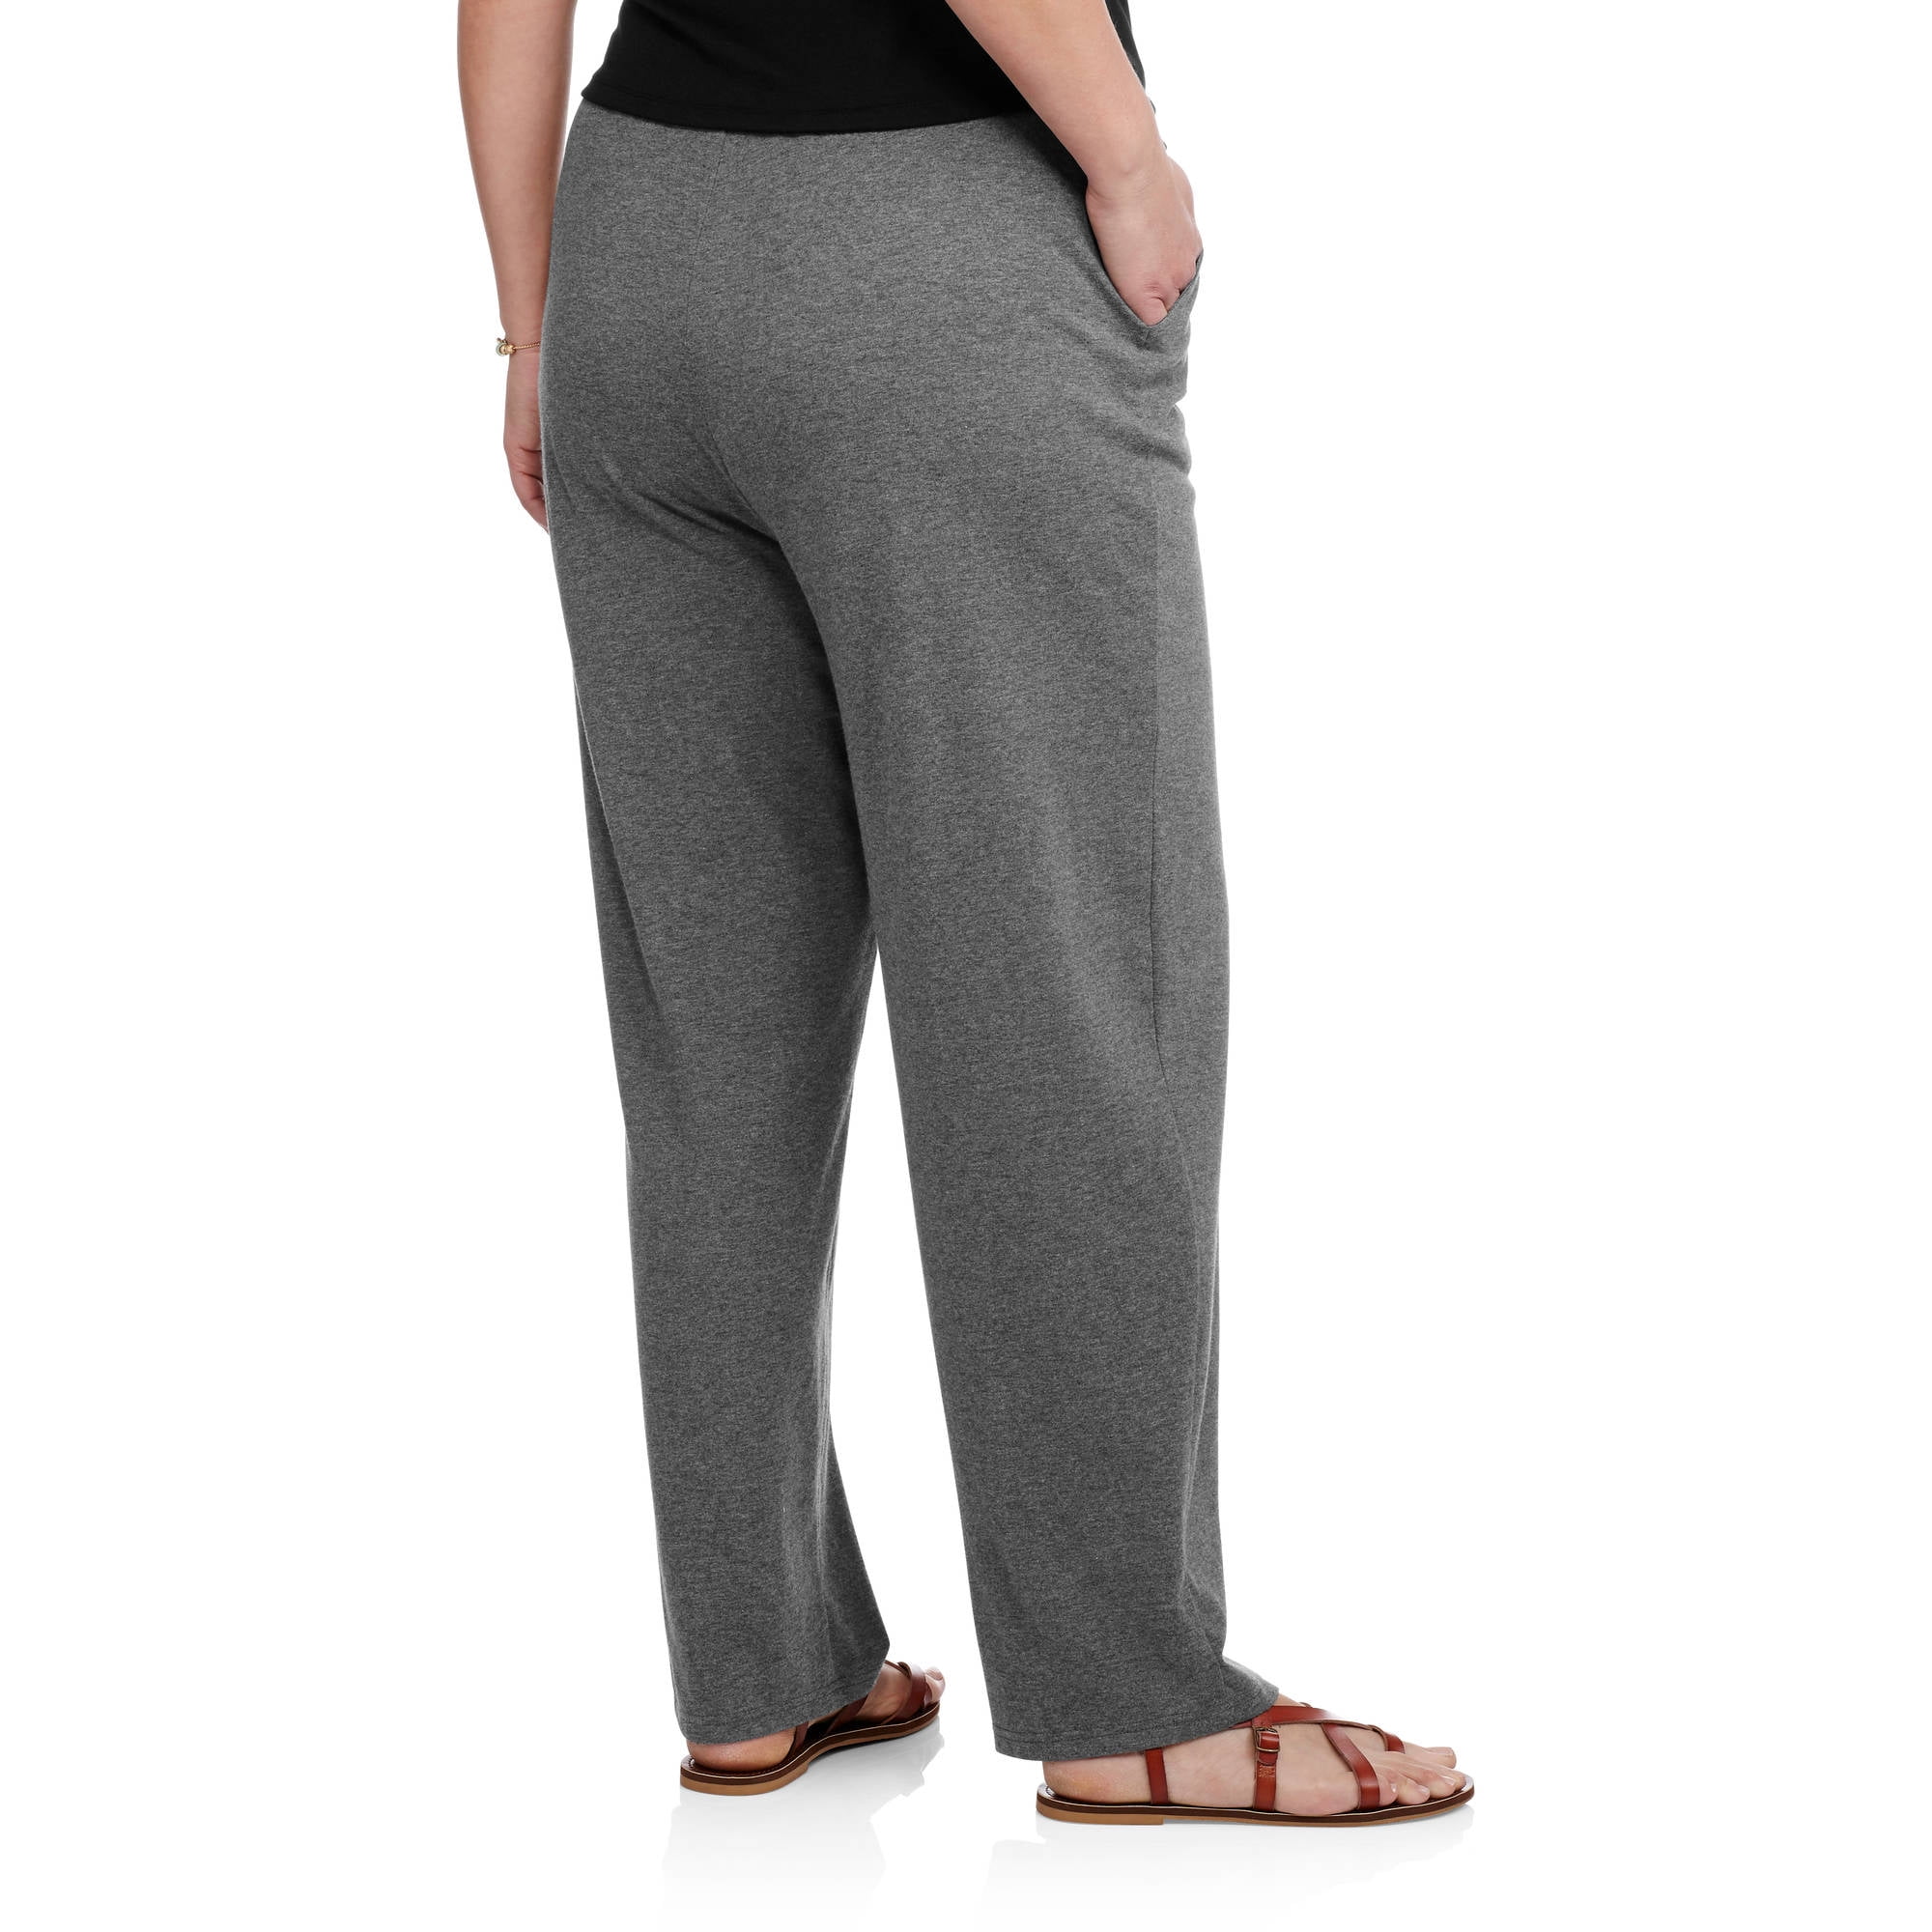 white stag knit pants with pockets